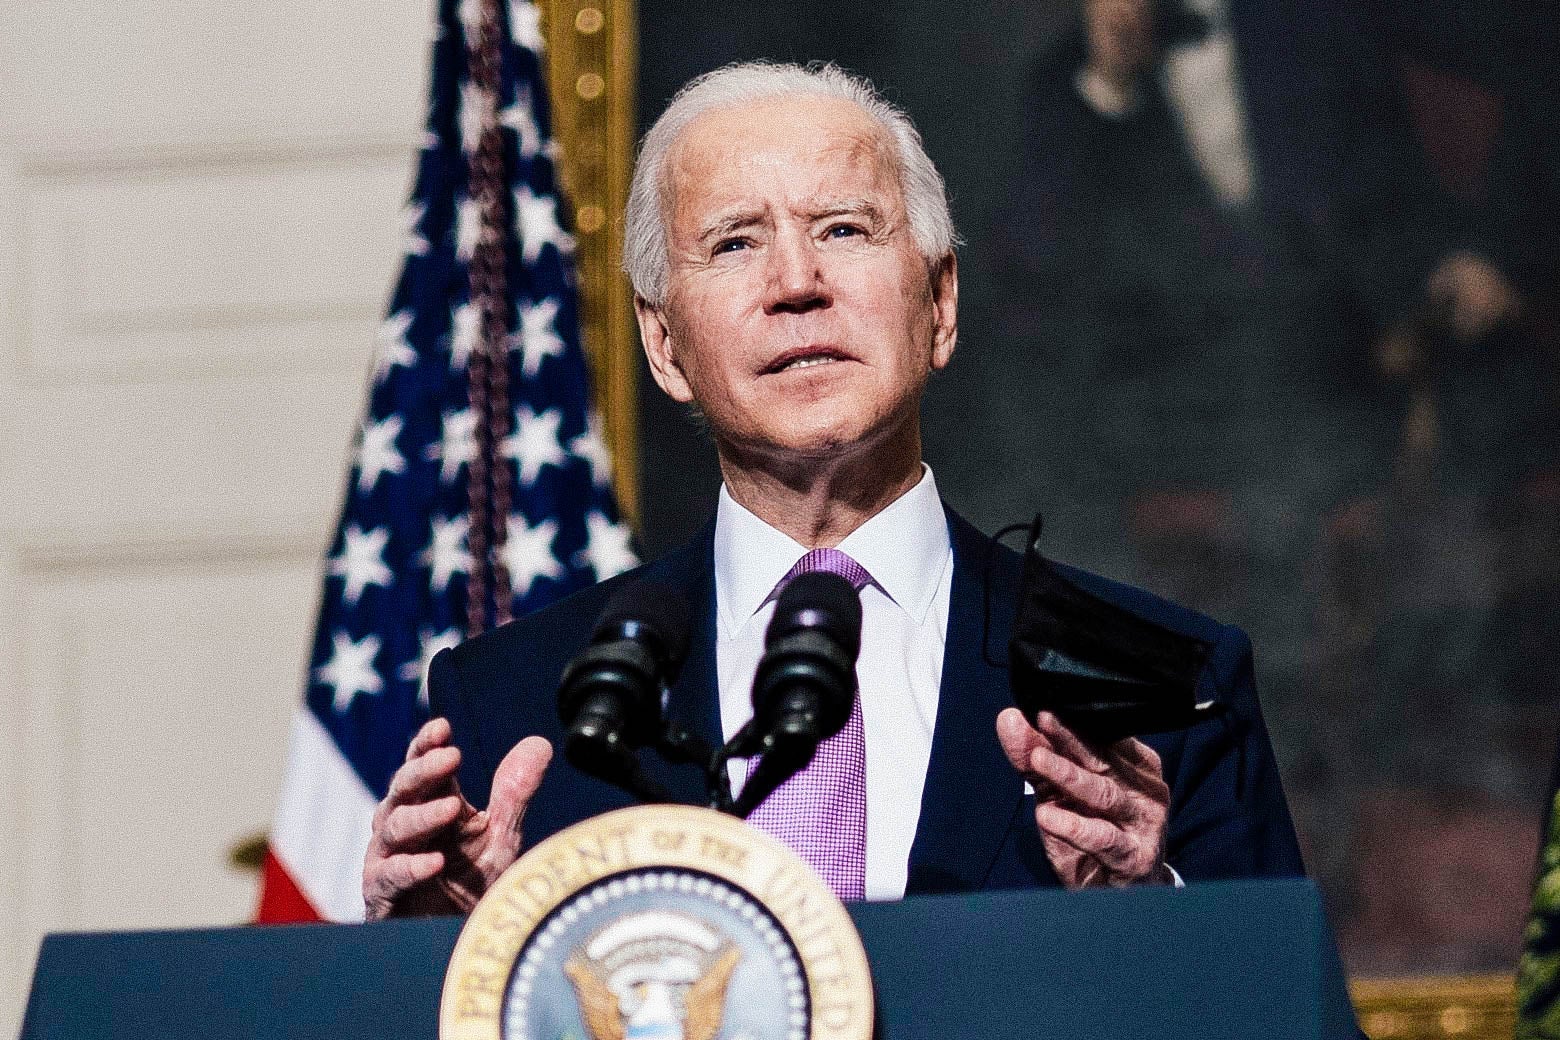 Biden gestures while speaking at a podium, with an American flag and a portrait of Abraham Lincoln in the background